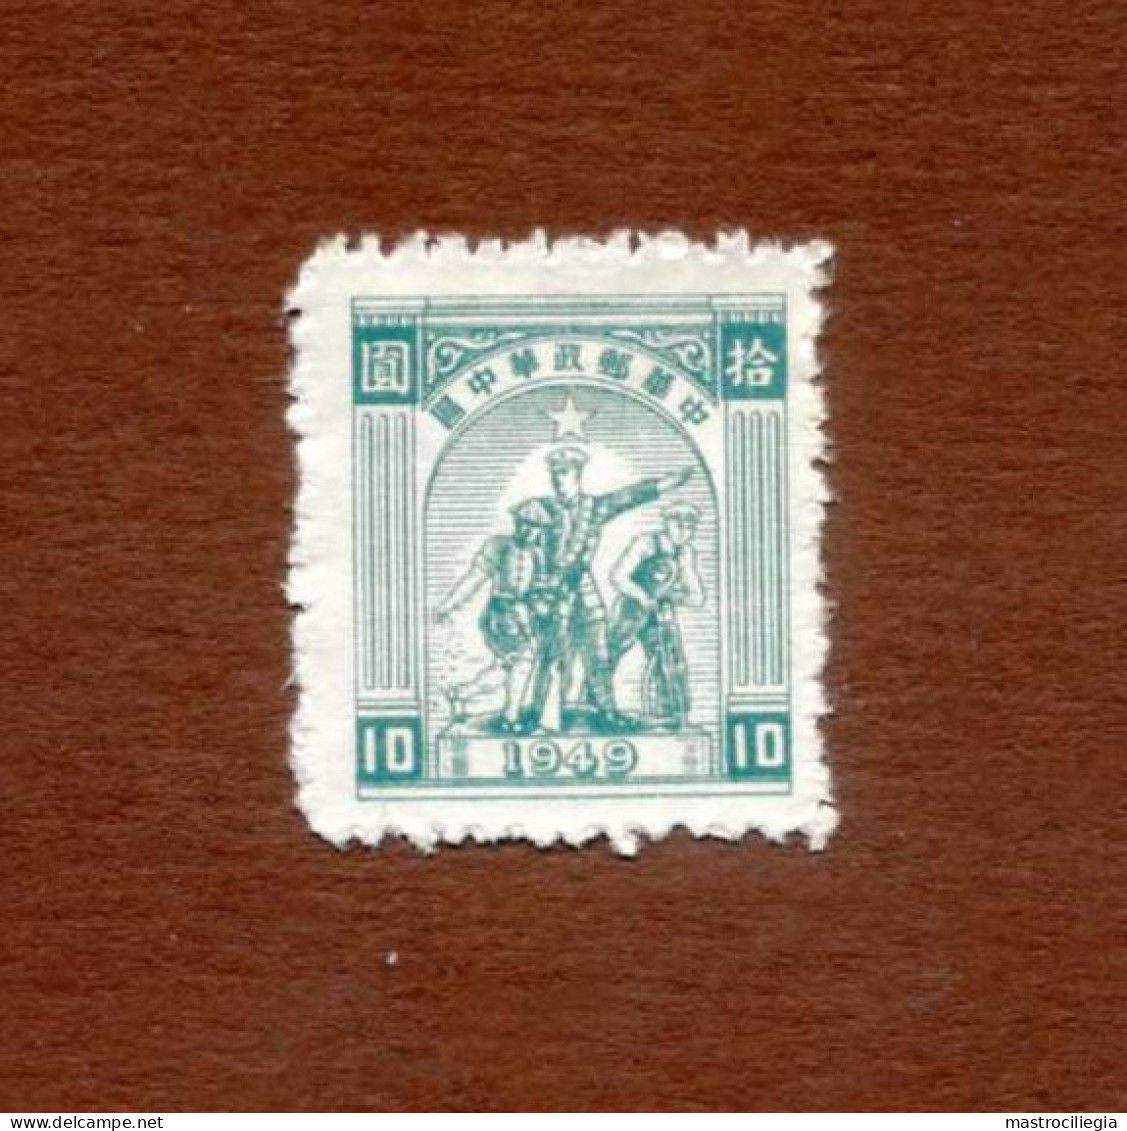 CHINA  CENTRAL  10$ - Cina Centrale 1948-49